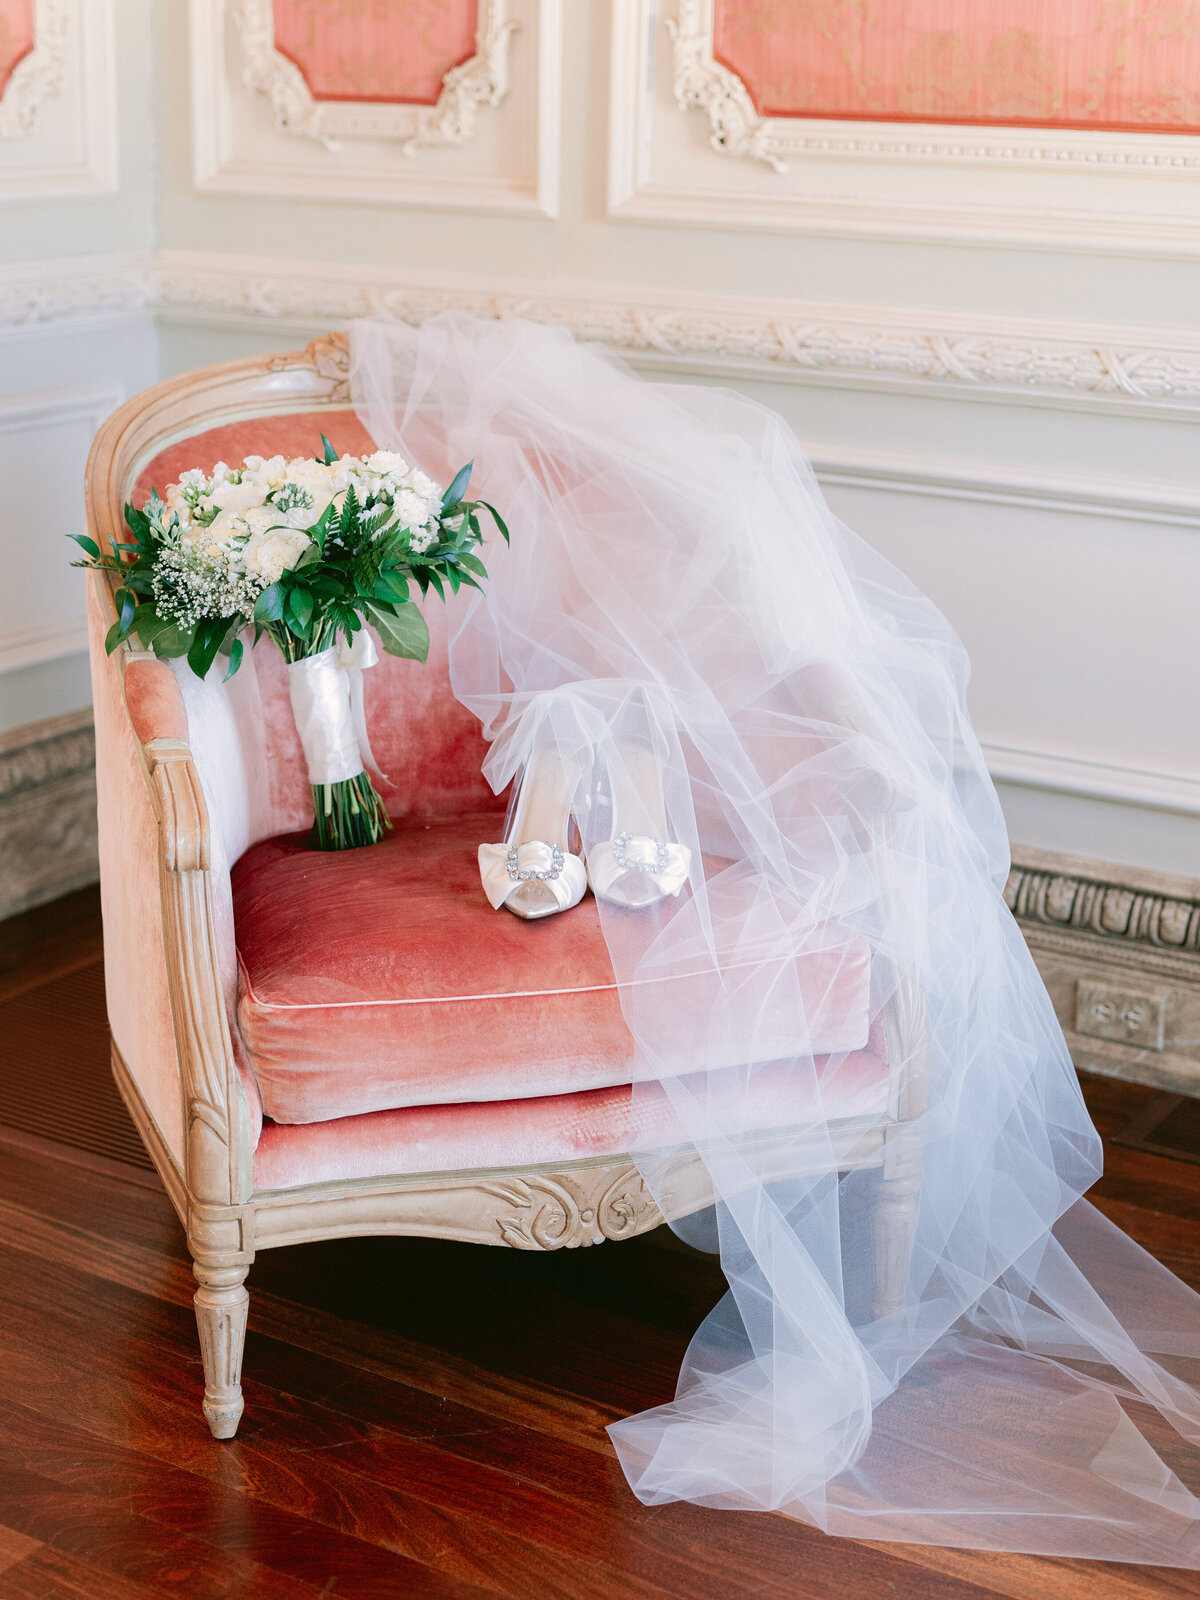 Luxurious arm chair displaying bridal veil, floral bouquet and shoes